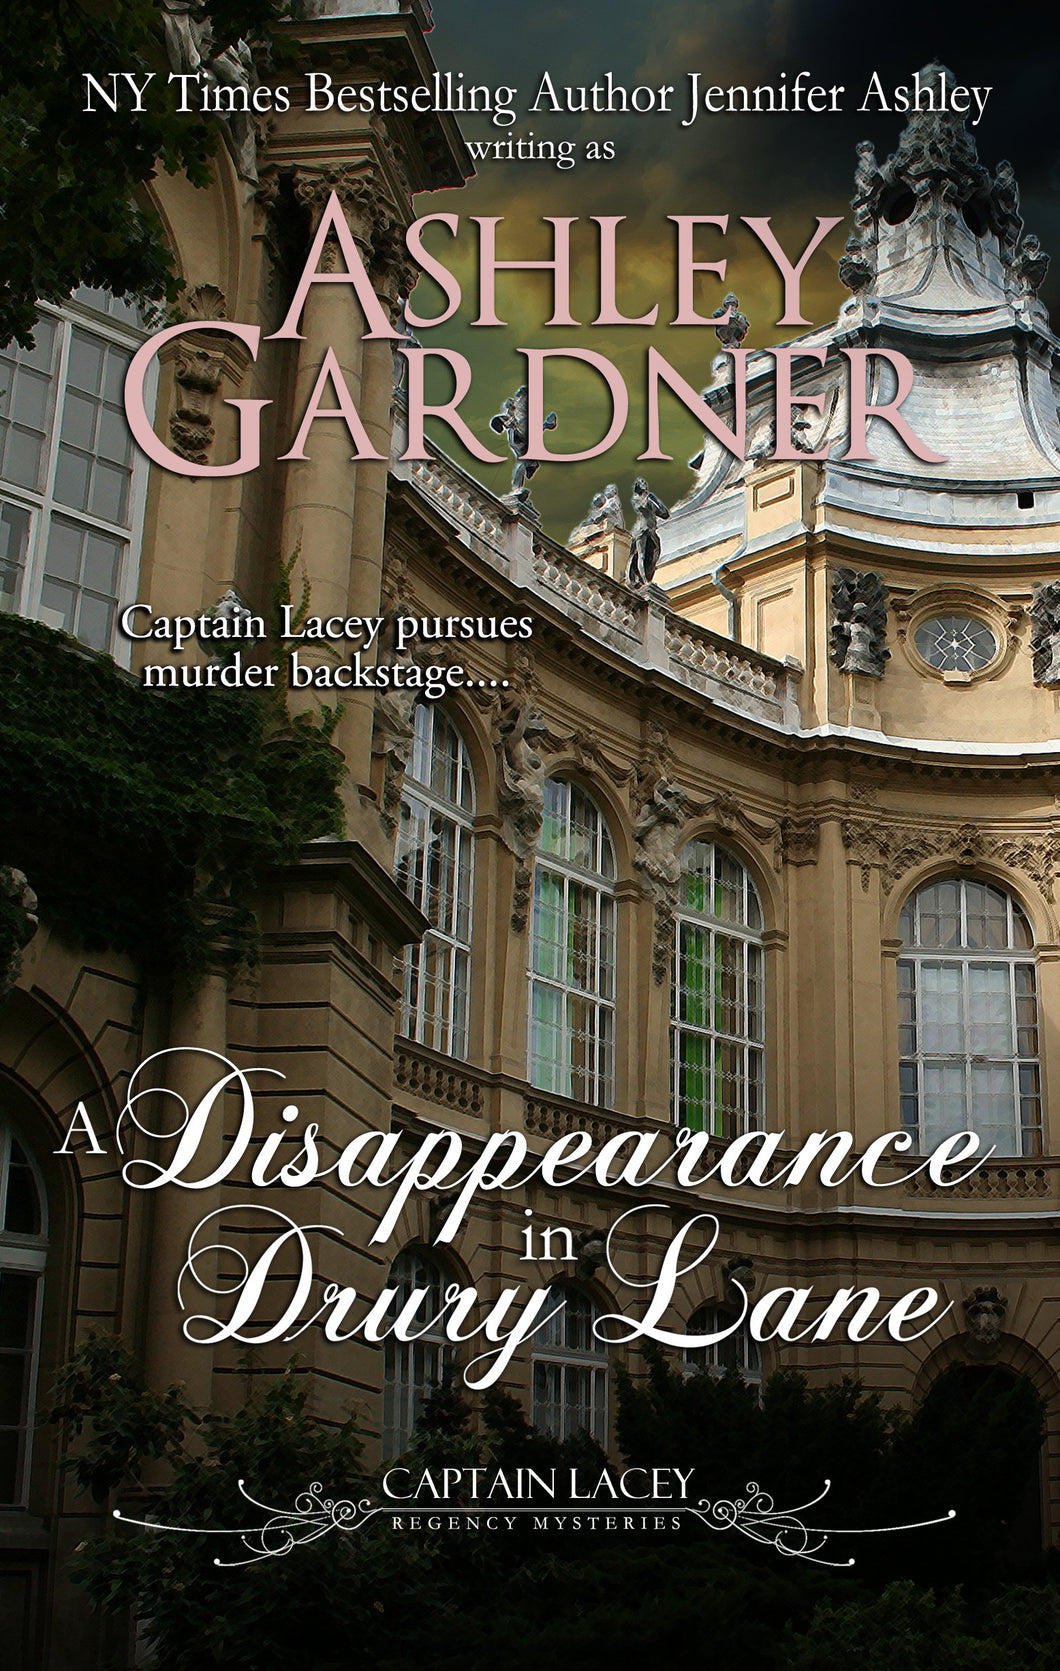 A Disappearance in Drury Lane (Captain Lacey Regency Mysteries, Book 8)